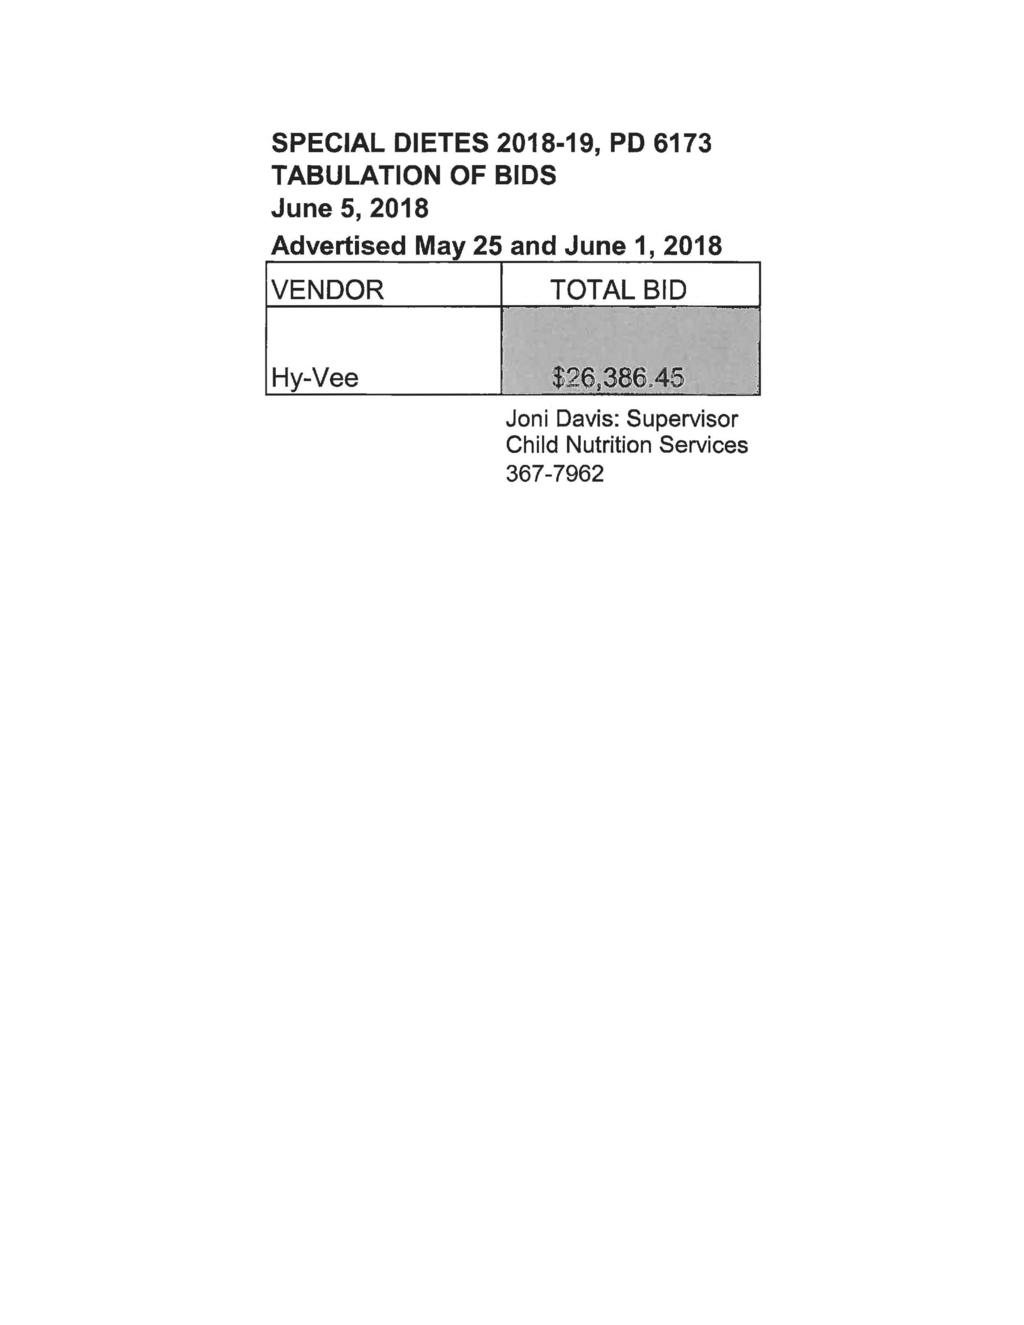 SPECIAL DIETES 2018-19, PD 6173 TABULATION OF BIDS June 5, 2018 Advertised May 25 and June 1,